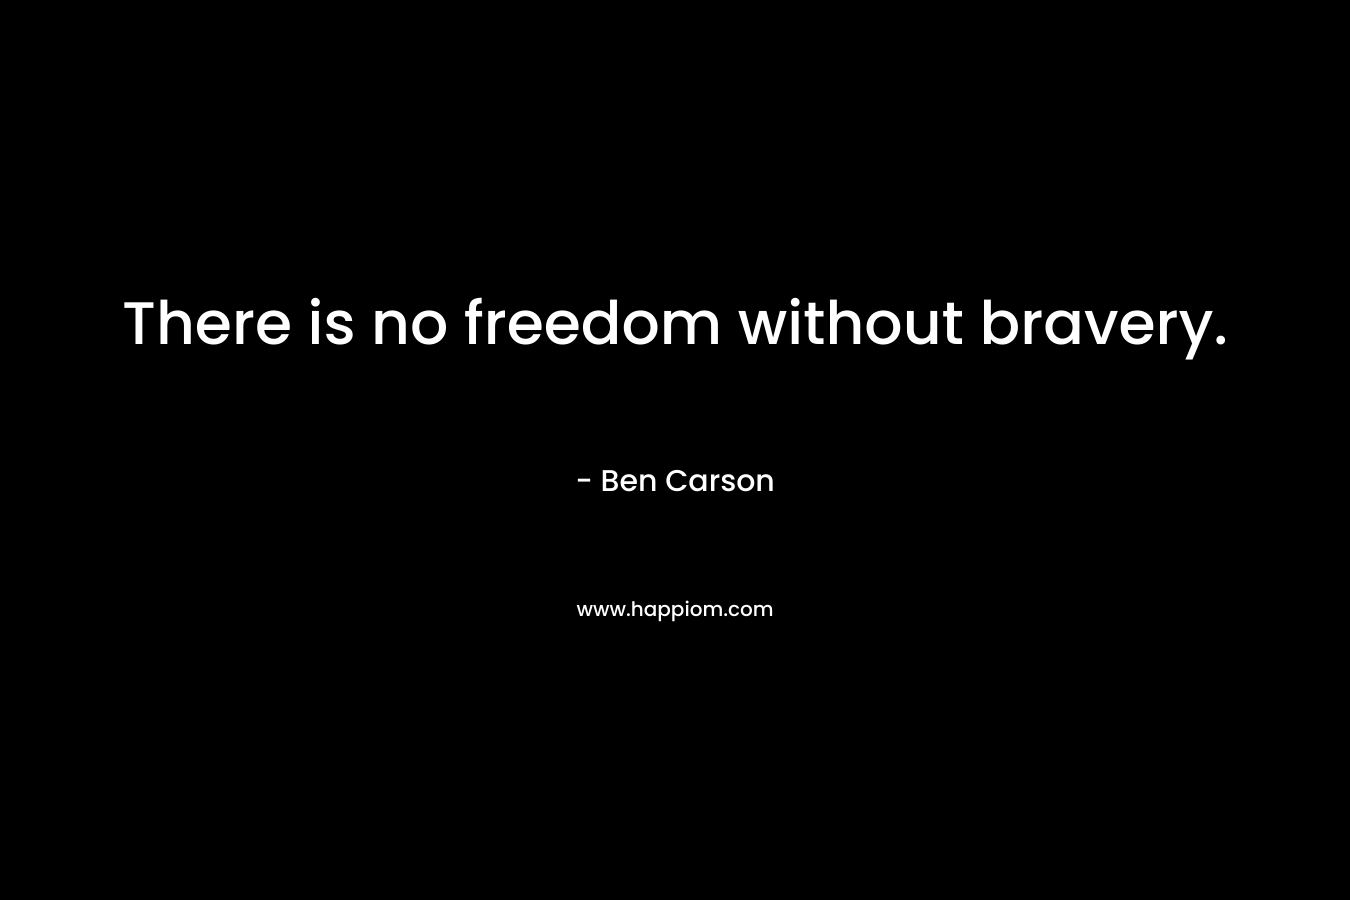 There is no freedom without bravery. – Ben Carson